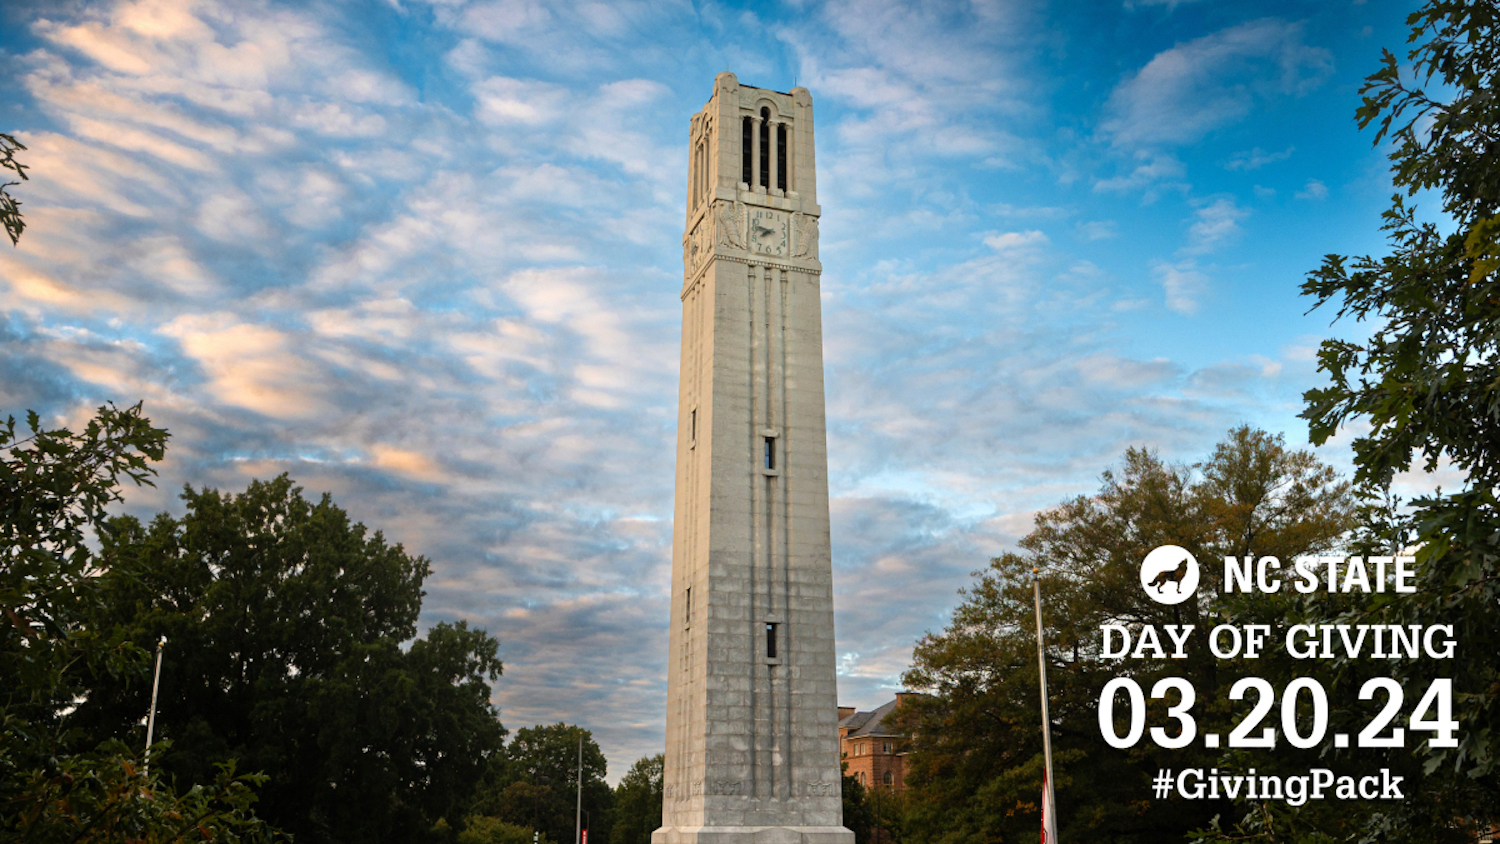 The Memorial Belltower with Day of Giving 2024 information